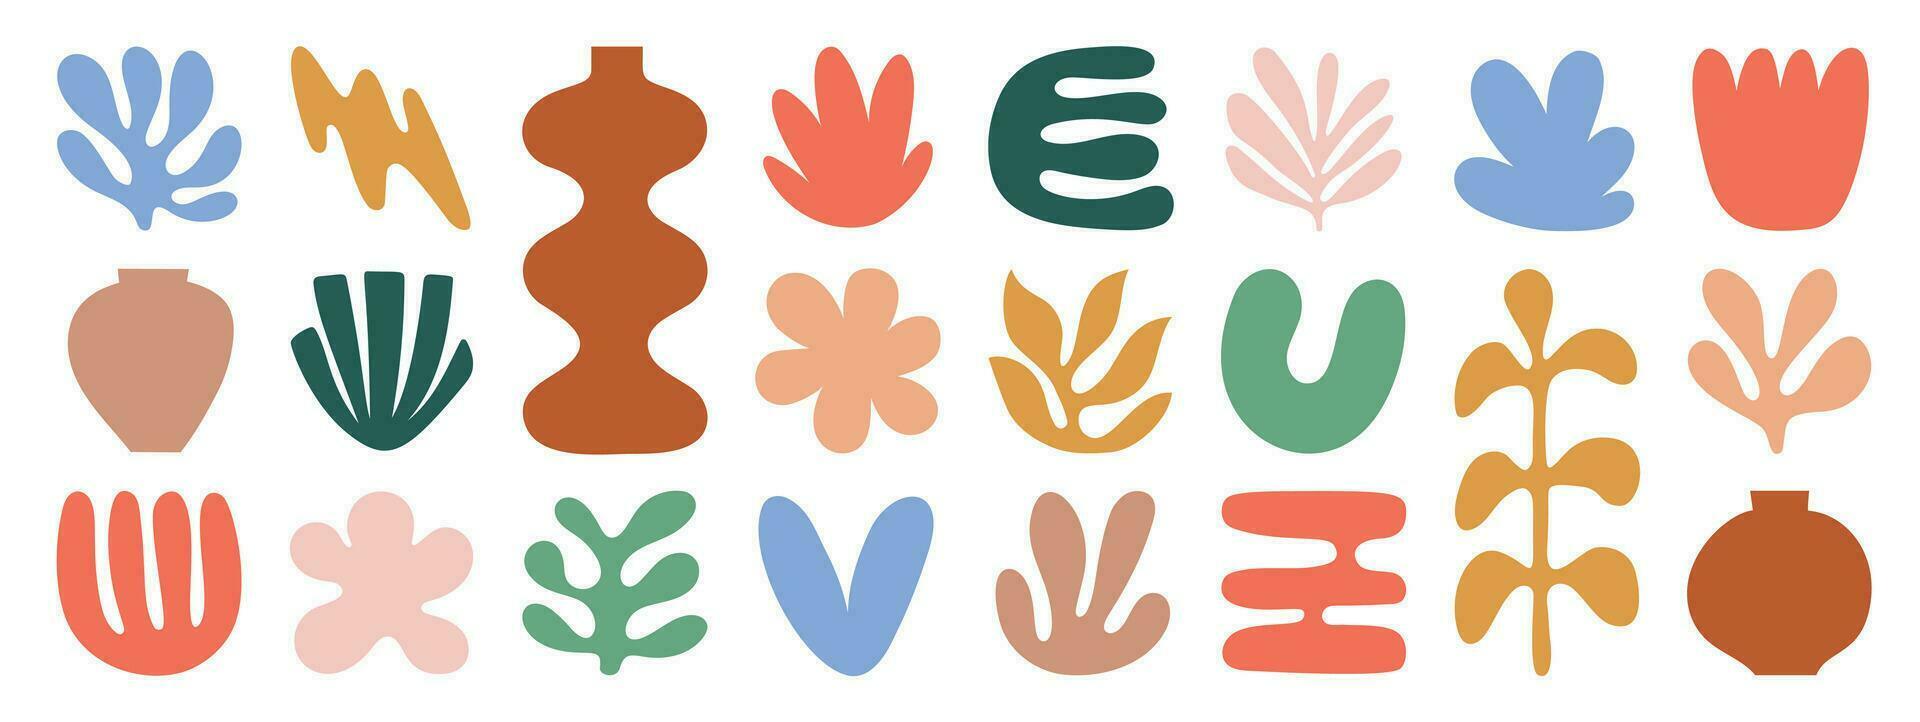 Set of abstract organic shapes inspired by matisse. Plants, coral, leaf, algae, vase in paper cut collage style. Contemporary aesthetic vector element for logo, decoration, print, cover, wallpaper.